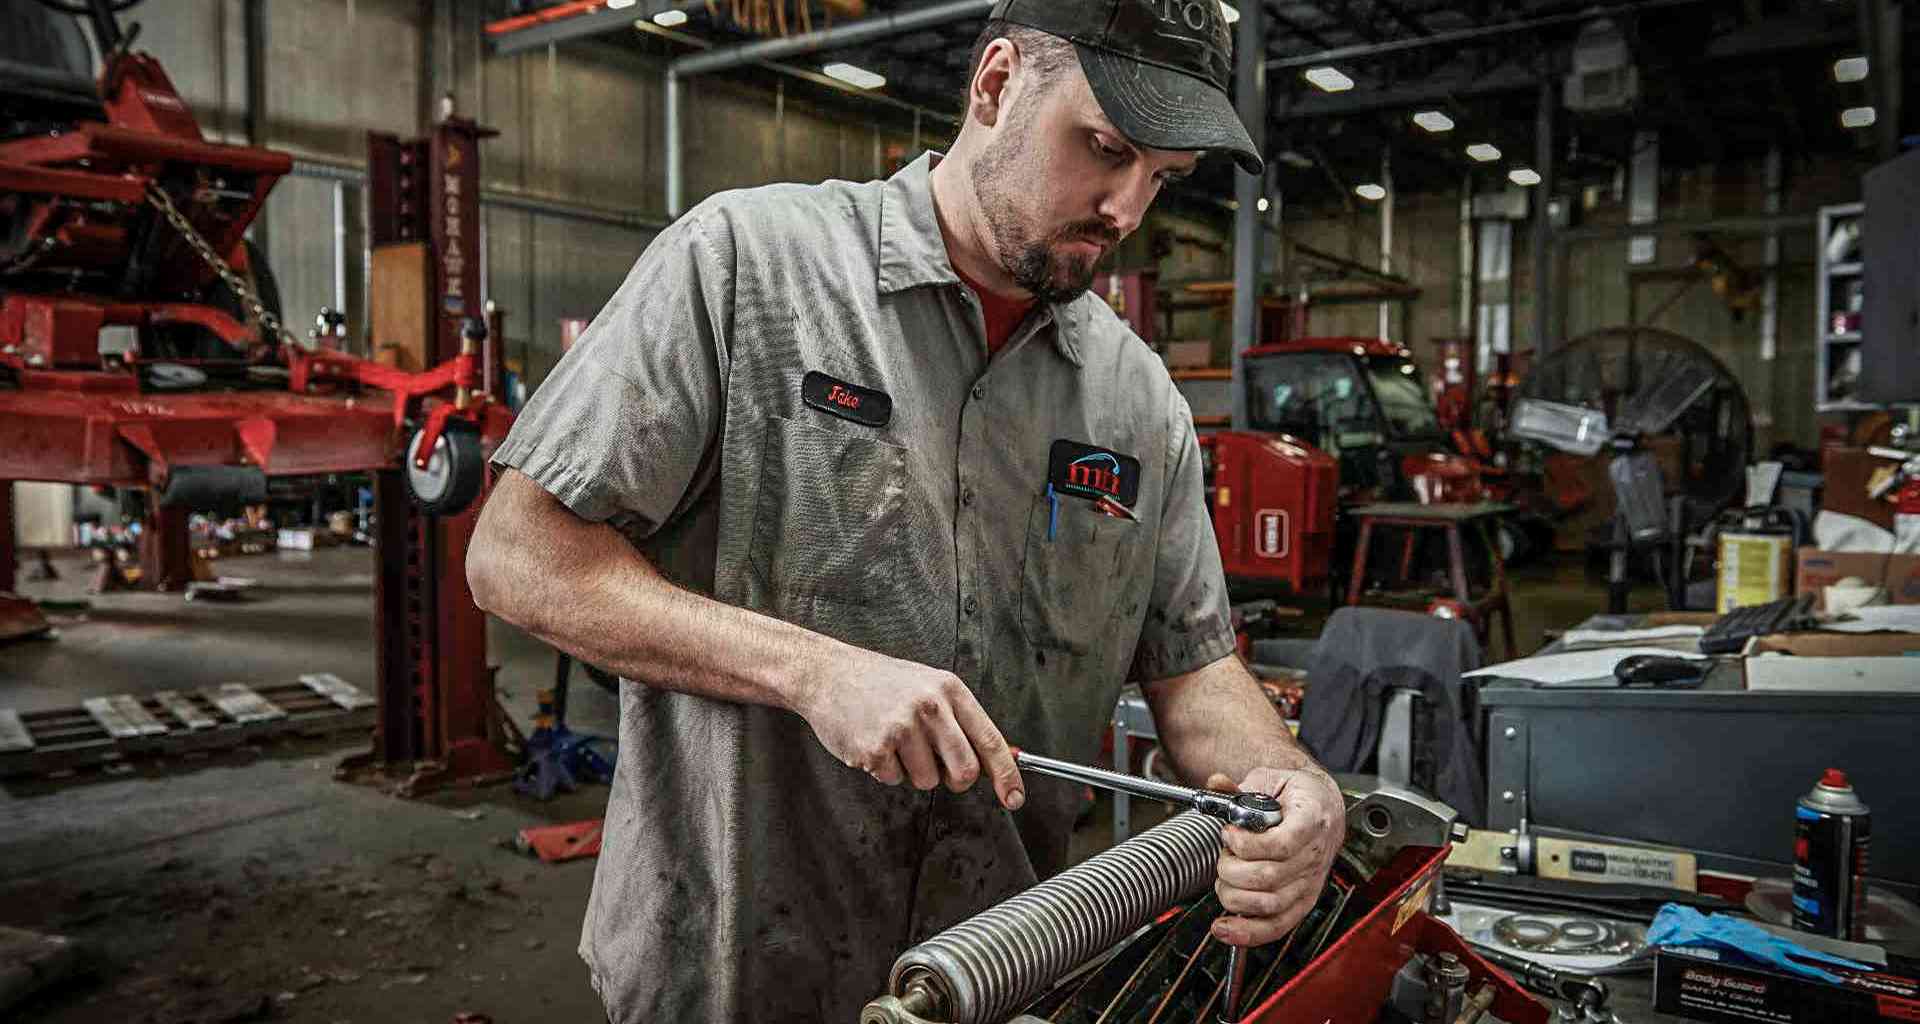 MTI ACADEMY classes are led by Toro Certified Technicians with over 175 years of combined industry experience